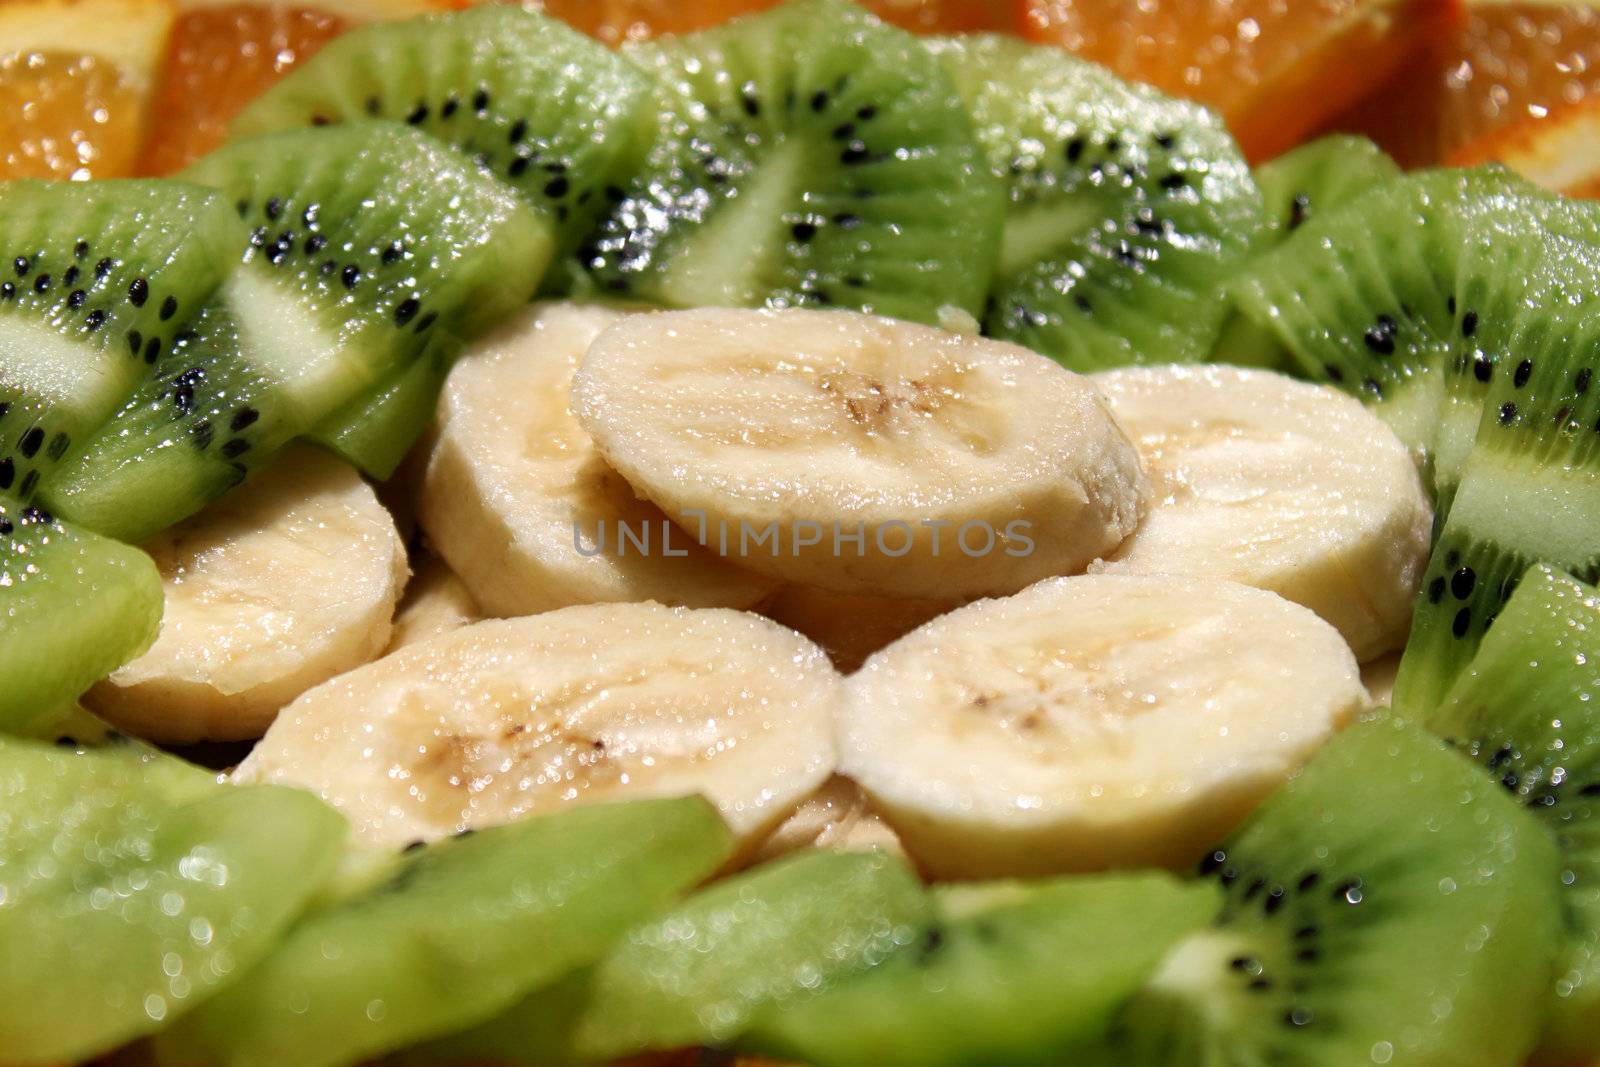 cut of tropical fruits on a plate